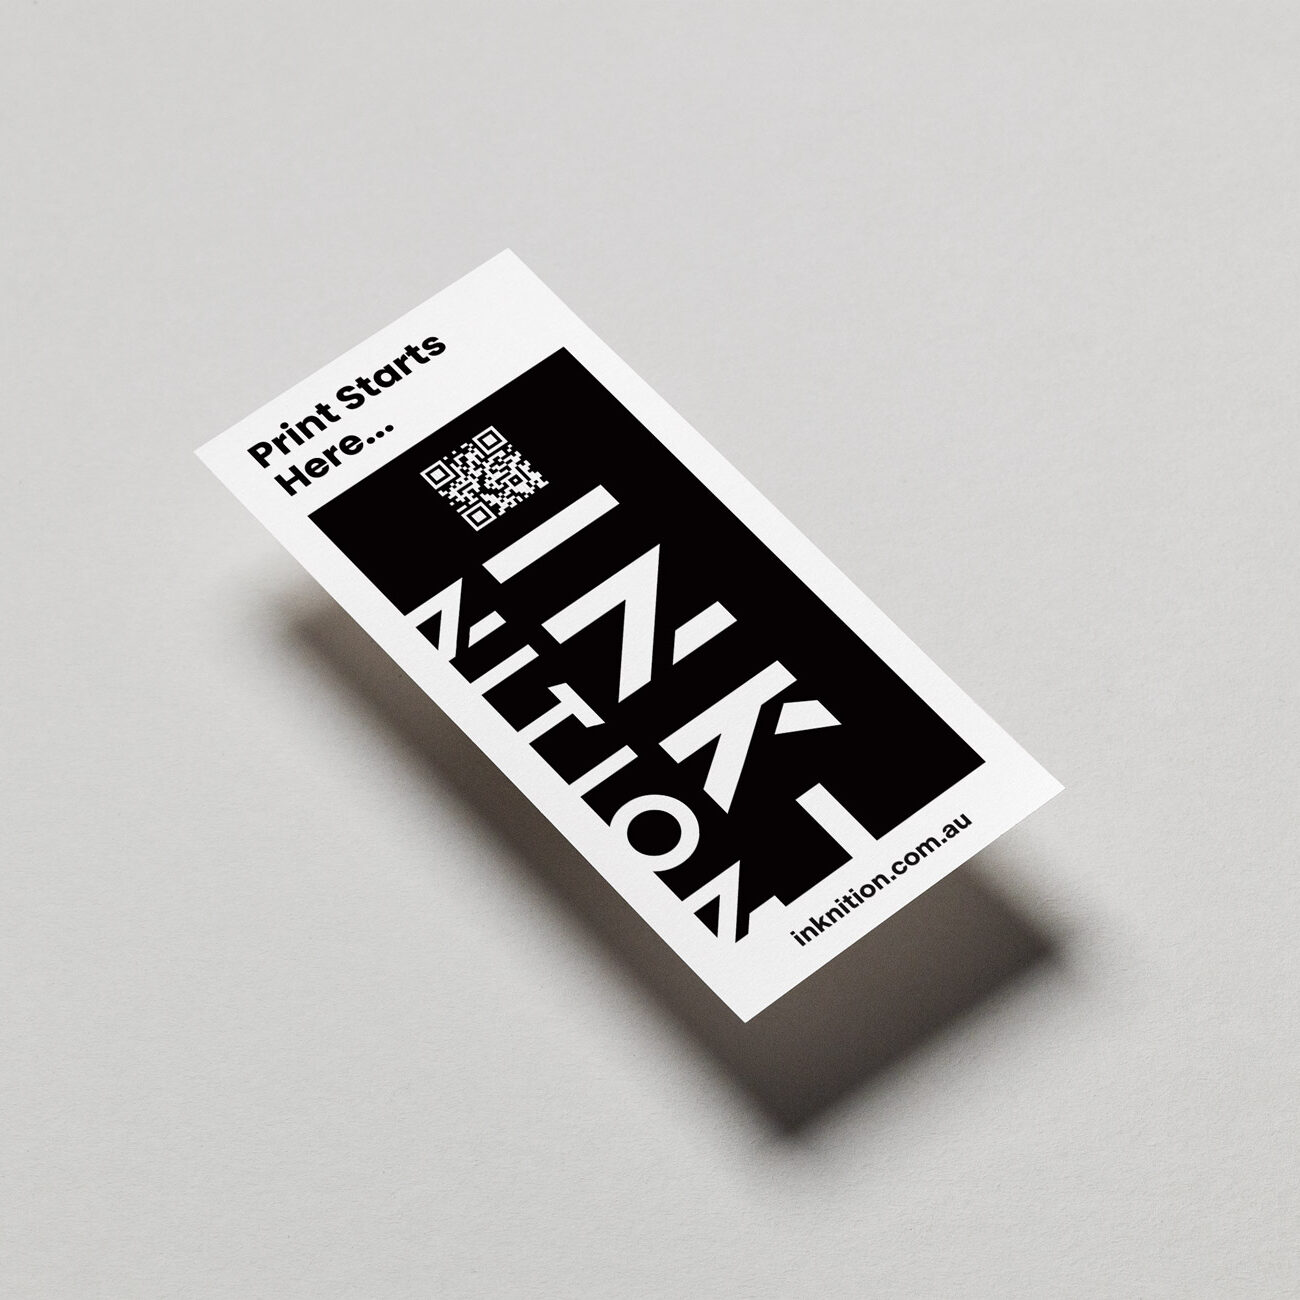 DL Flyers white card stock floating on light grey background